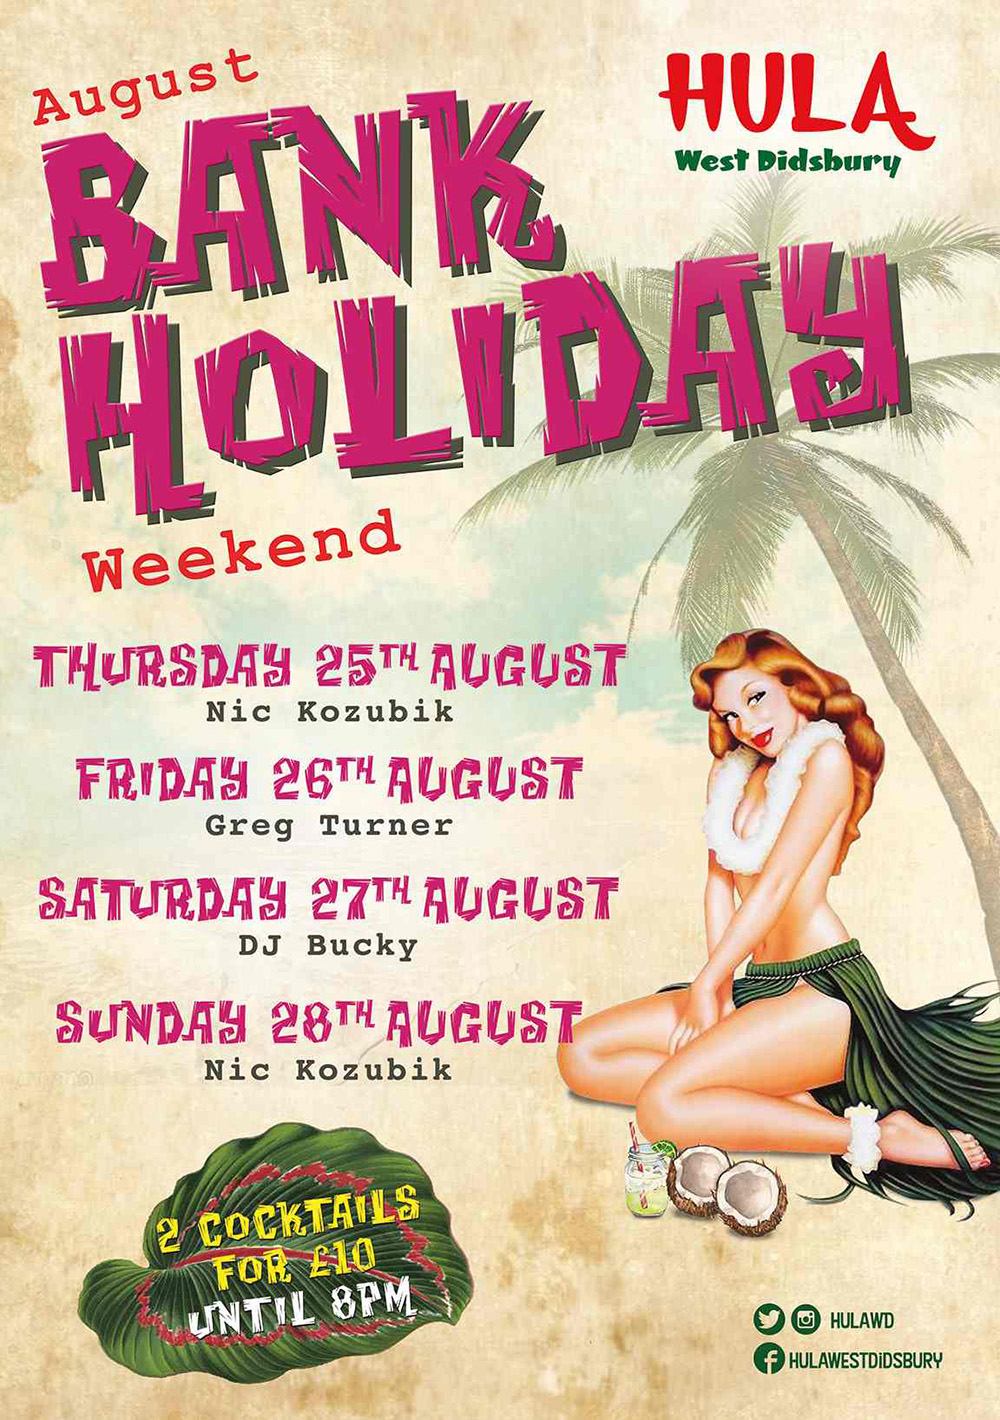 Hula's WD Bank Holiday - August